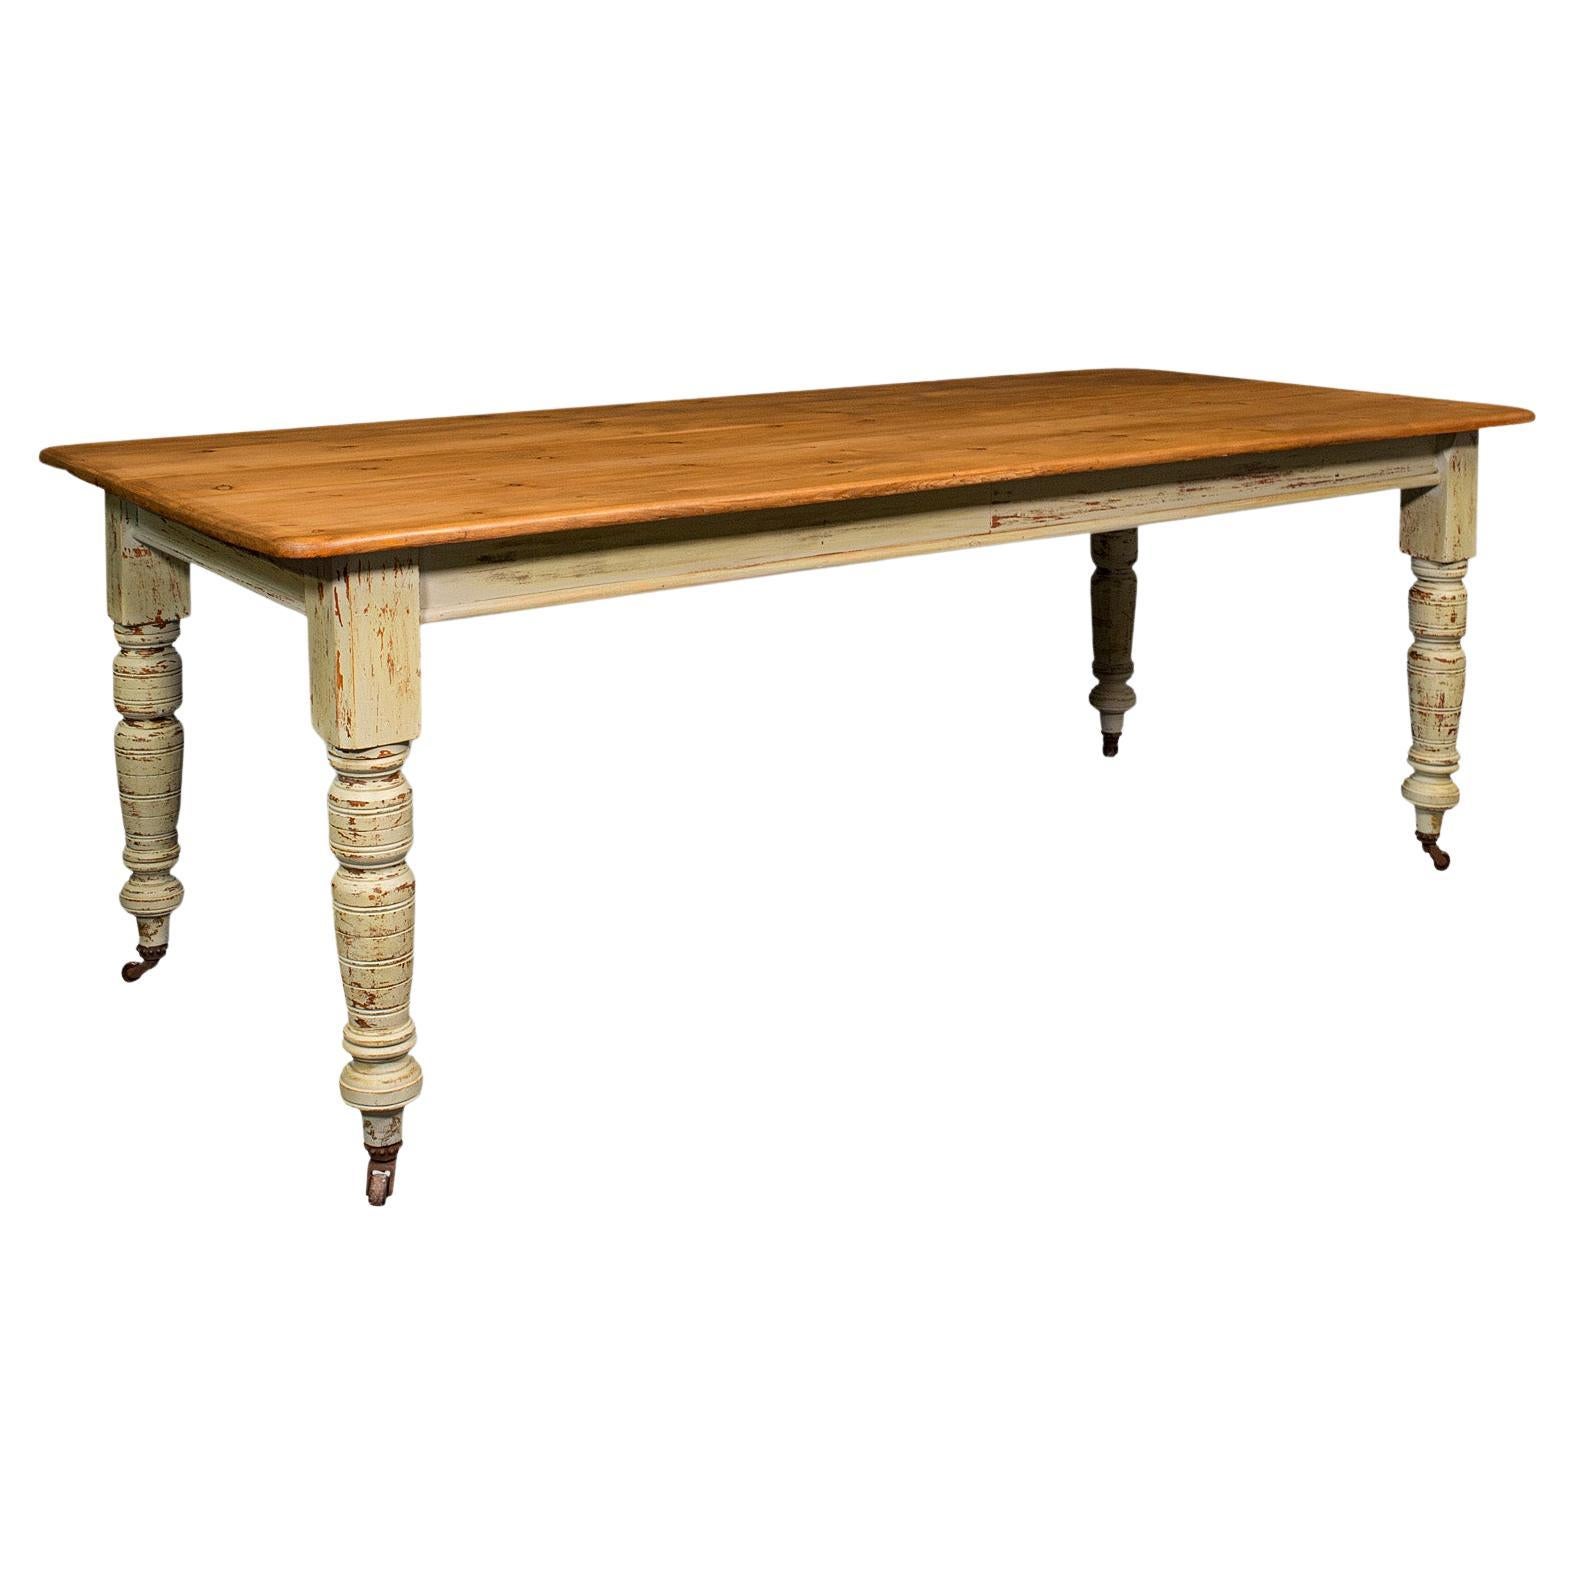 Antique Farmhouse Table, English, Pine, 6 Seat, Dining, Kitchen, Victorian, 1900 For Sale